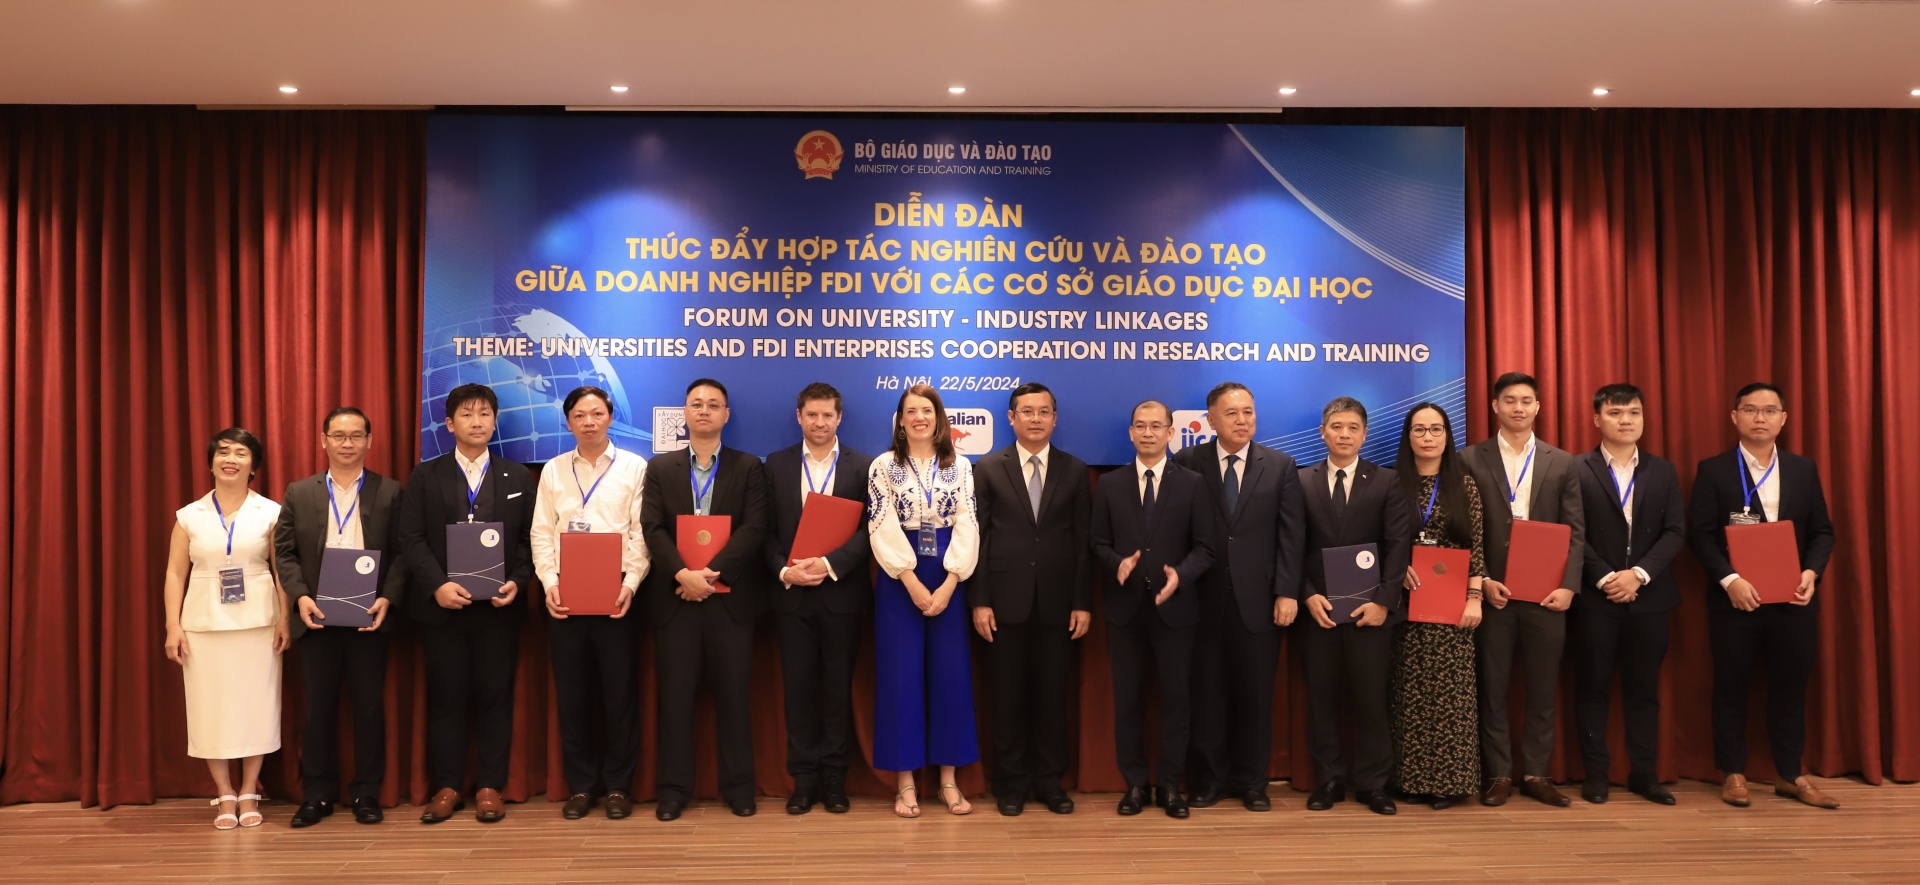 Training collaboration promoted at Vietnamese universities